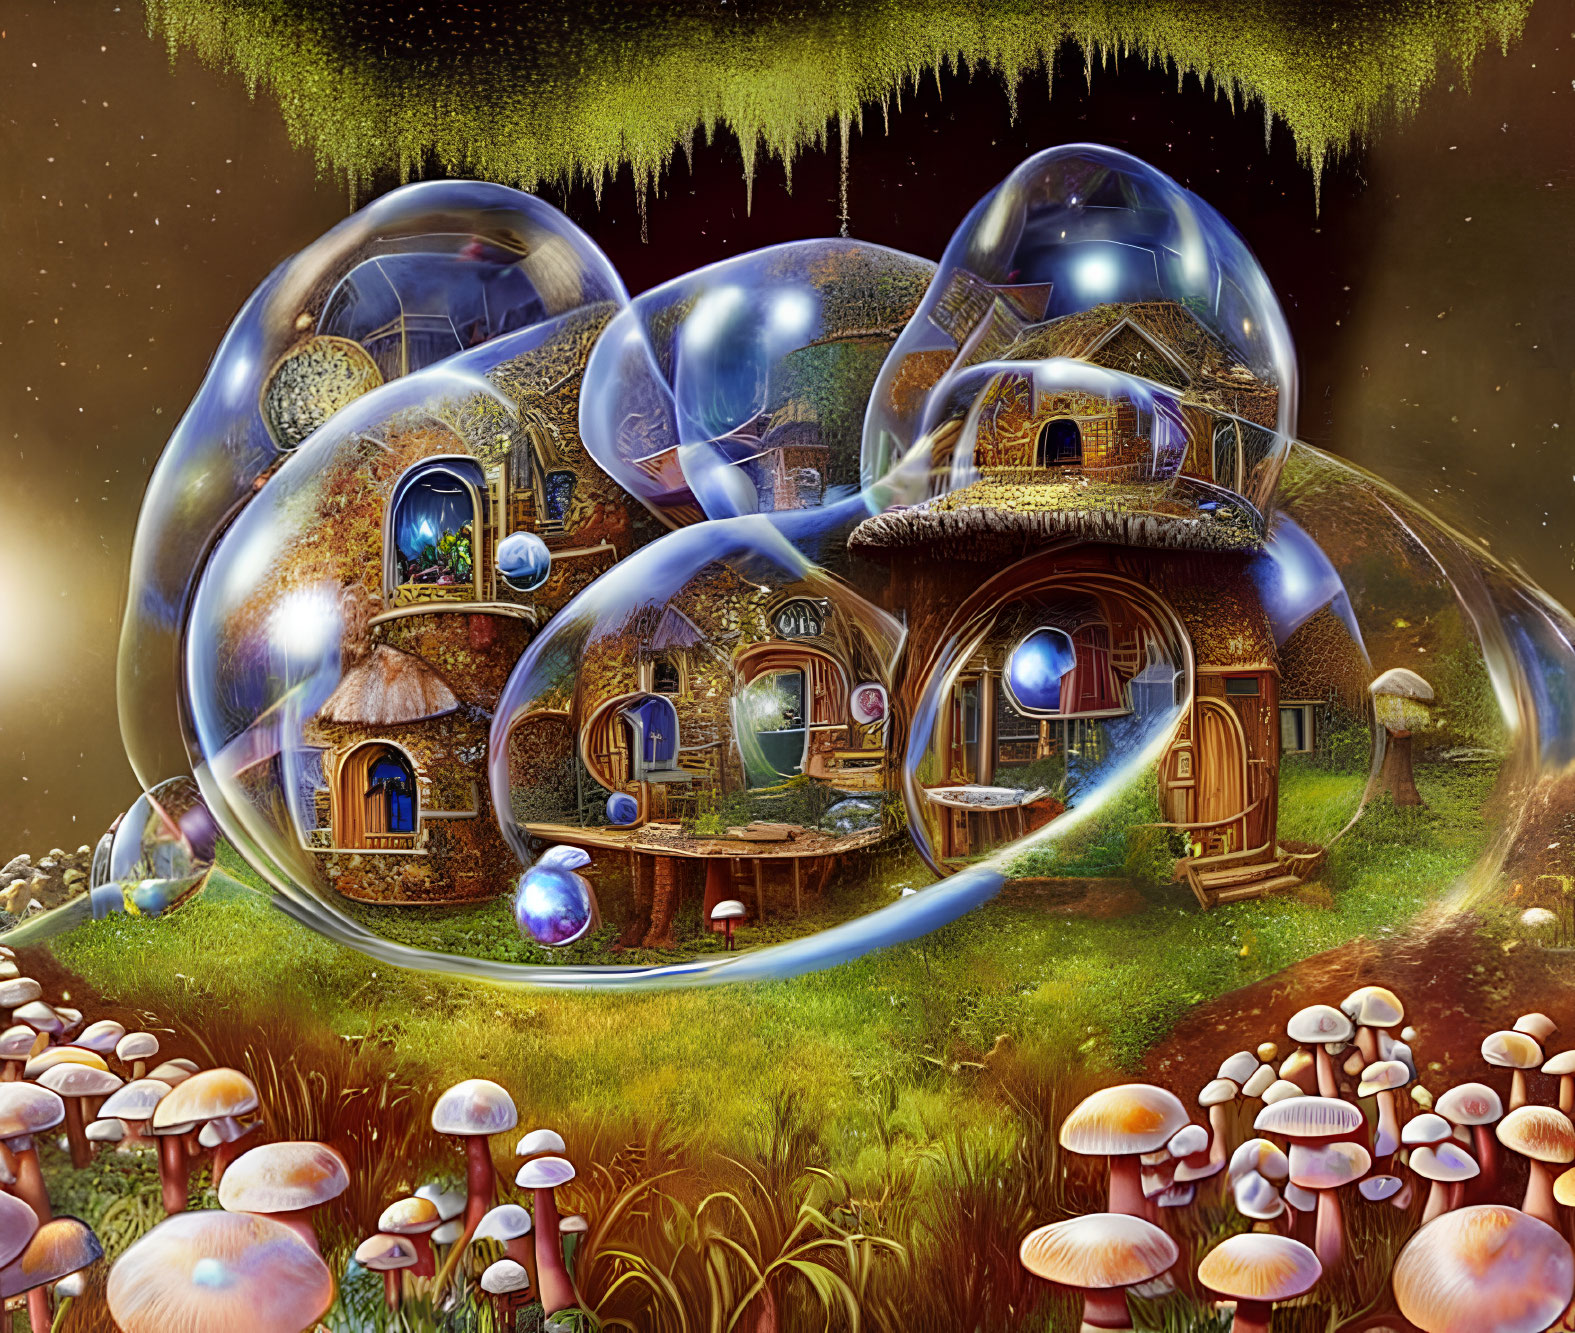 Whimsical digital artwork: Cluster of fairy-tale cottages in transparent bubbles surrounded by oversized mushrooms